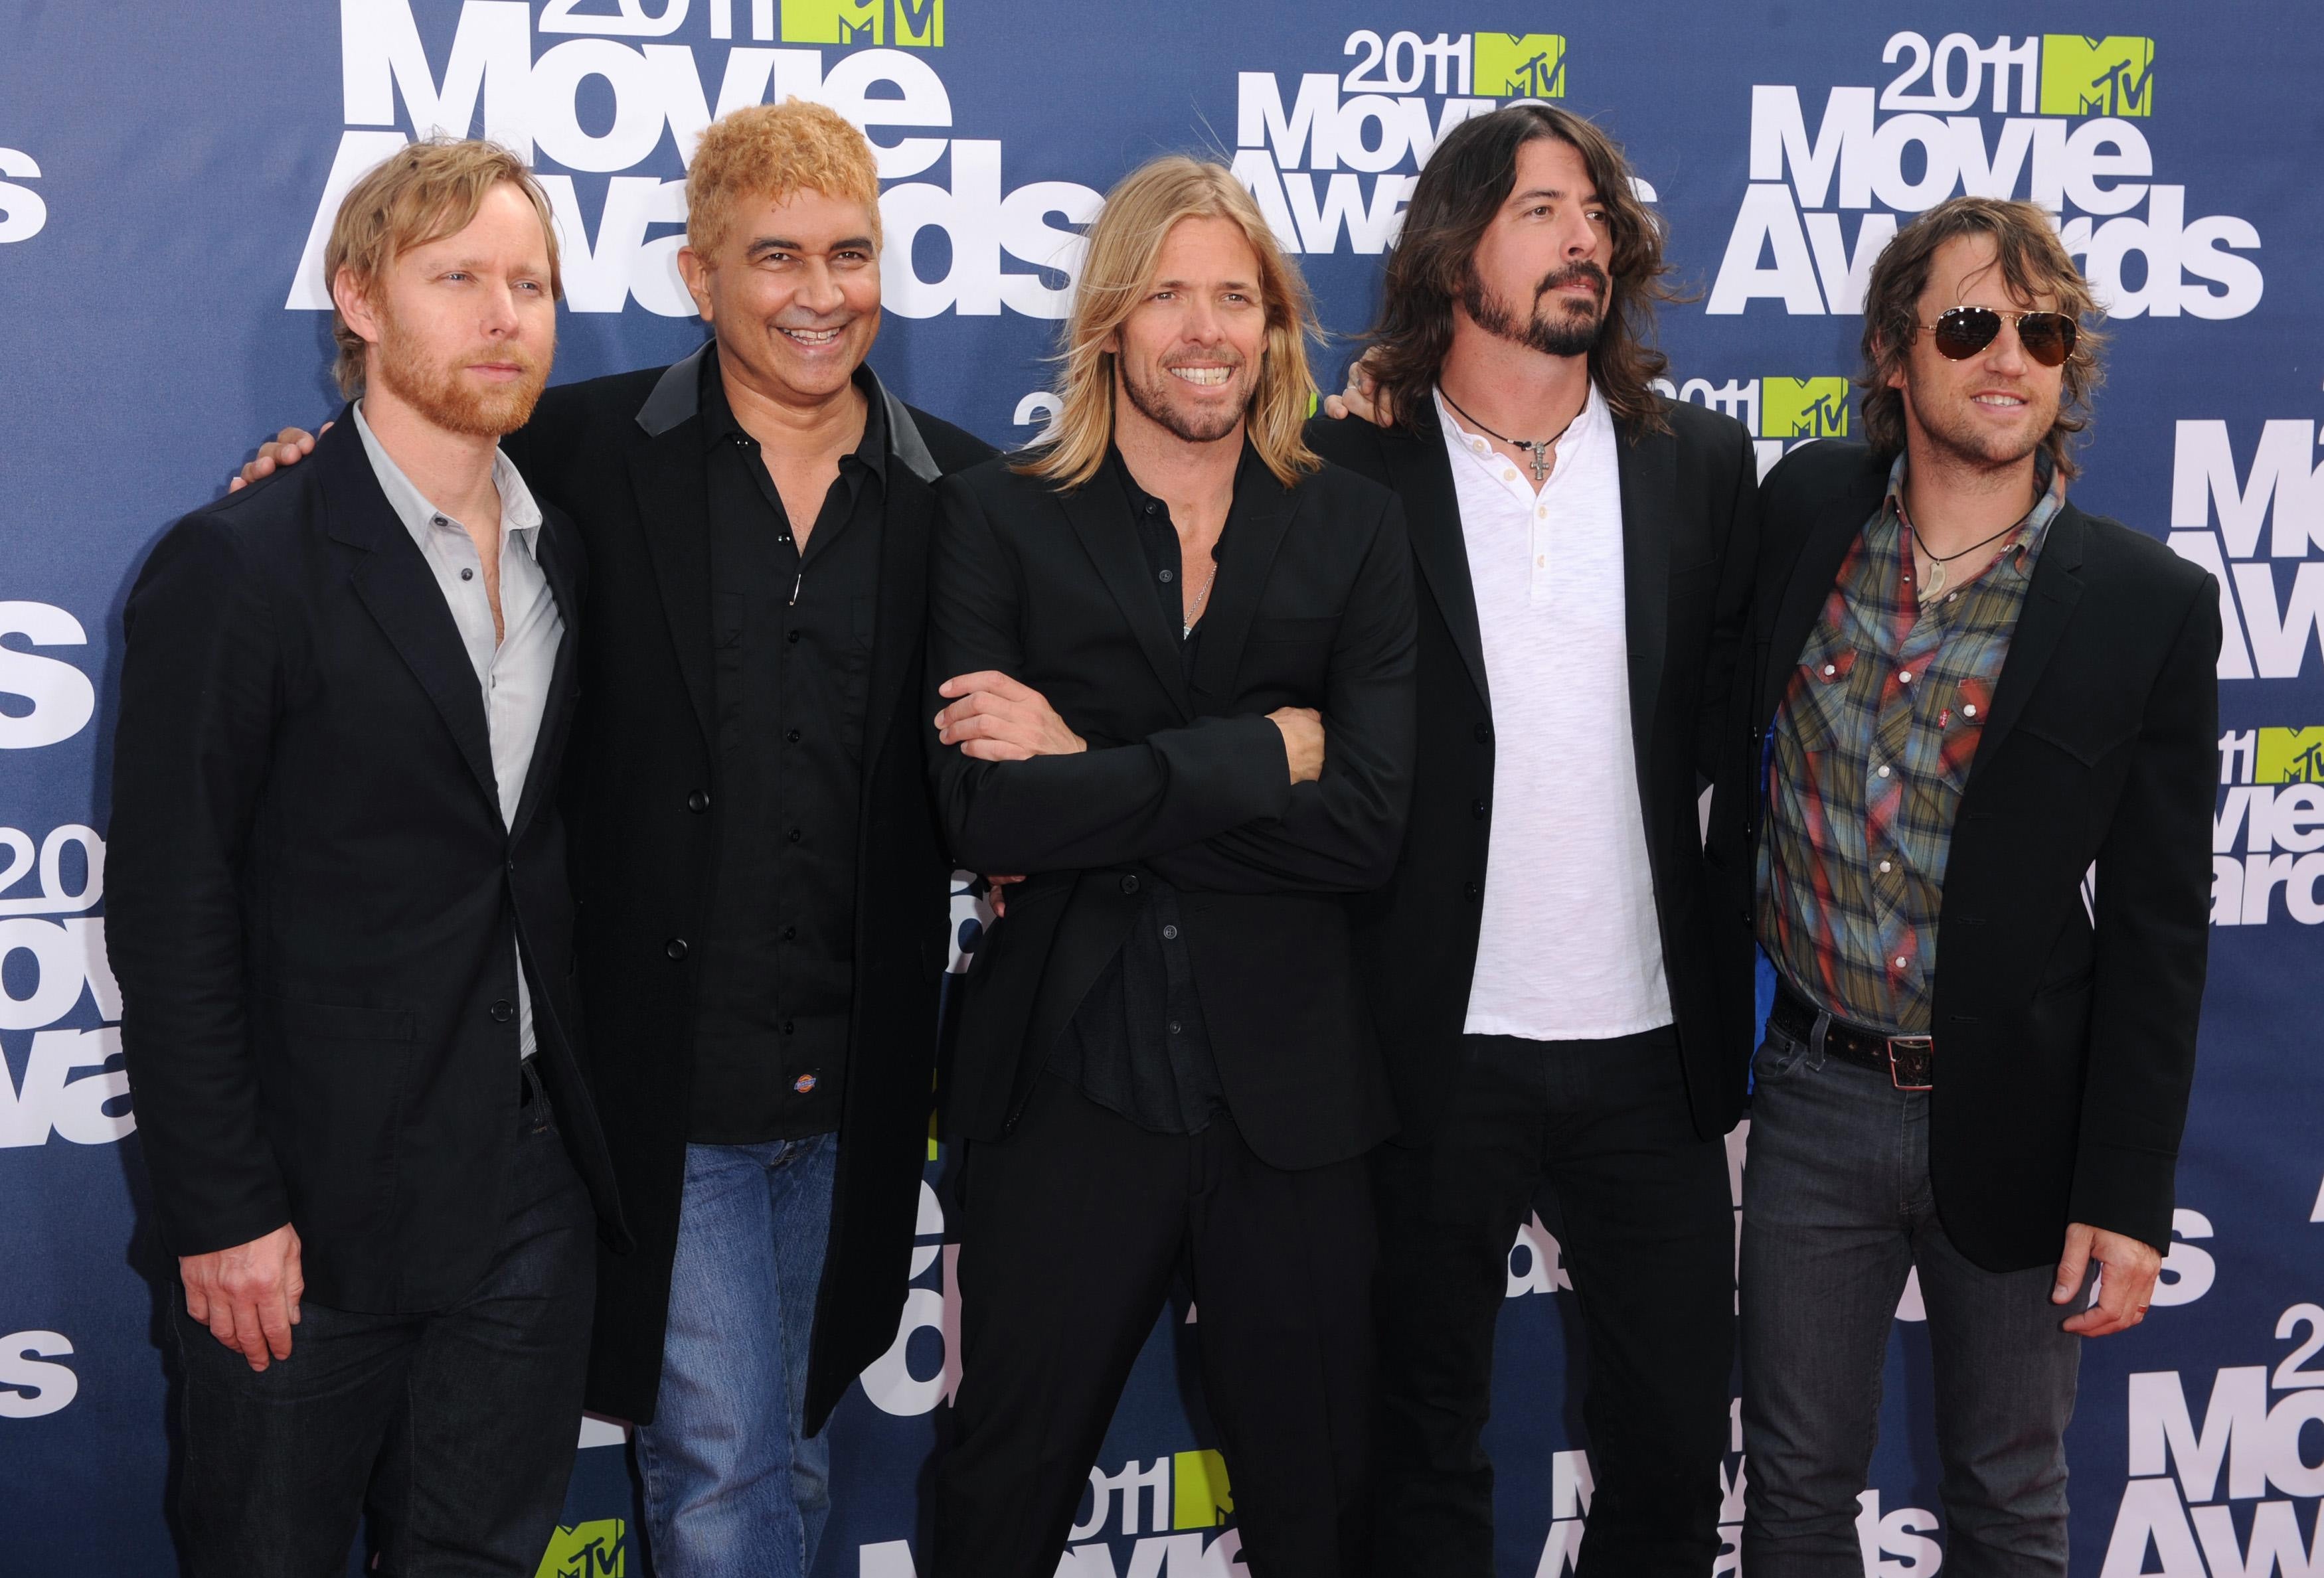 Taylor Hawkins with his Foo Fighters band mates (left to right) Nate Mendel, Pat Smear, Taylor Hawkins, Dave Grohl and Chris Shiflett (PA)